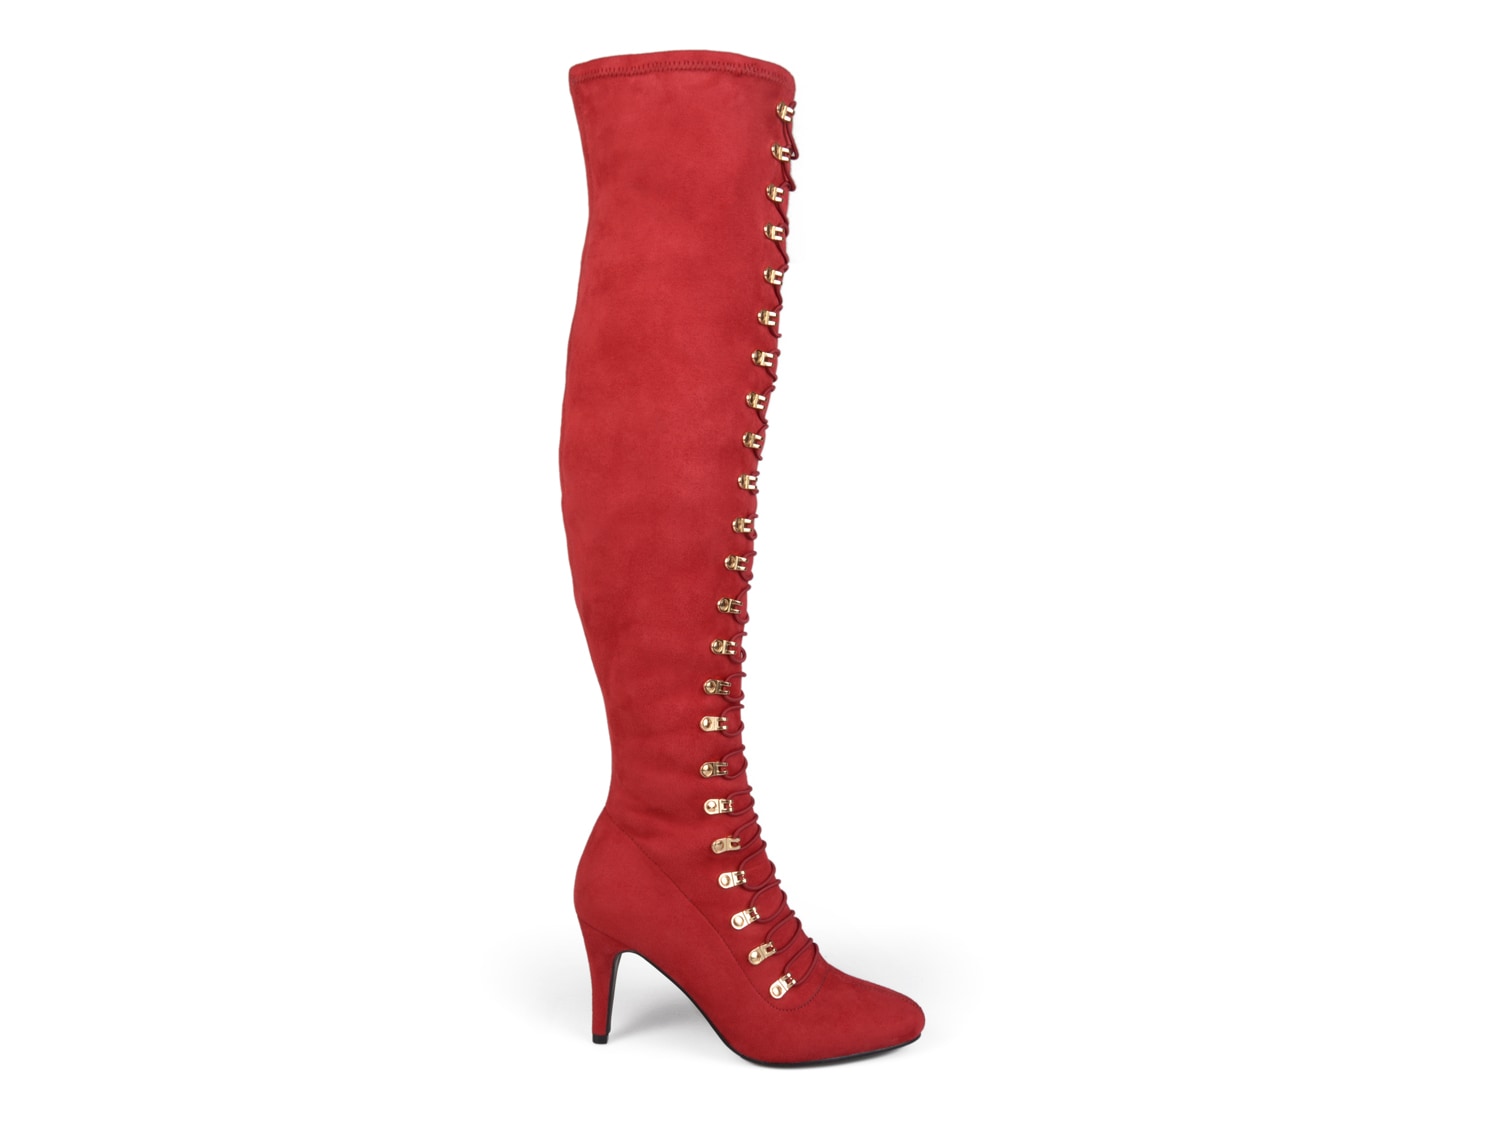 thigh high red boots wide calf